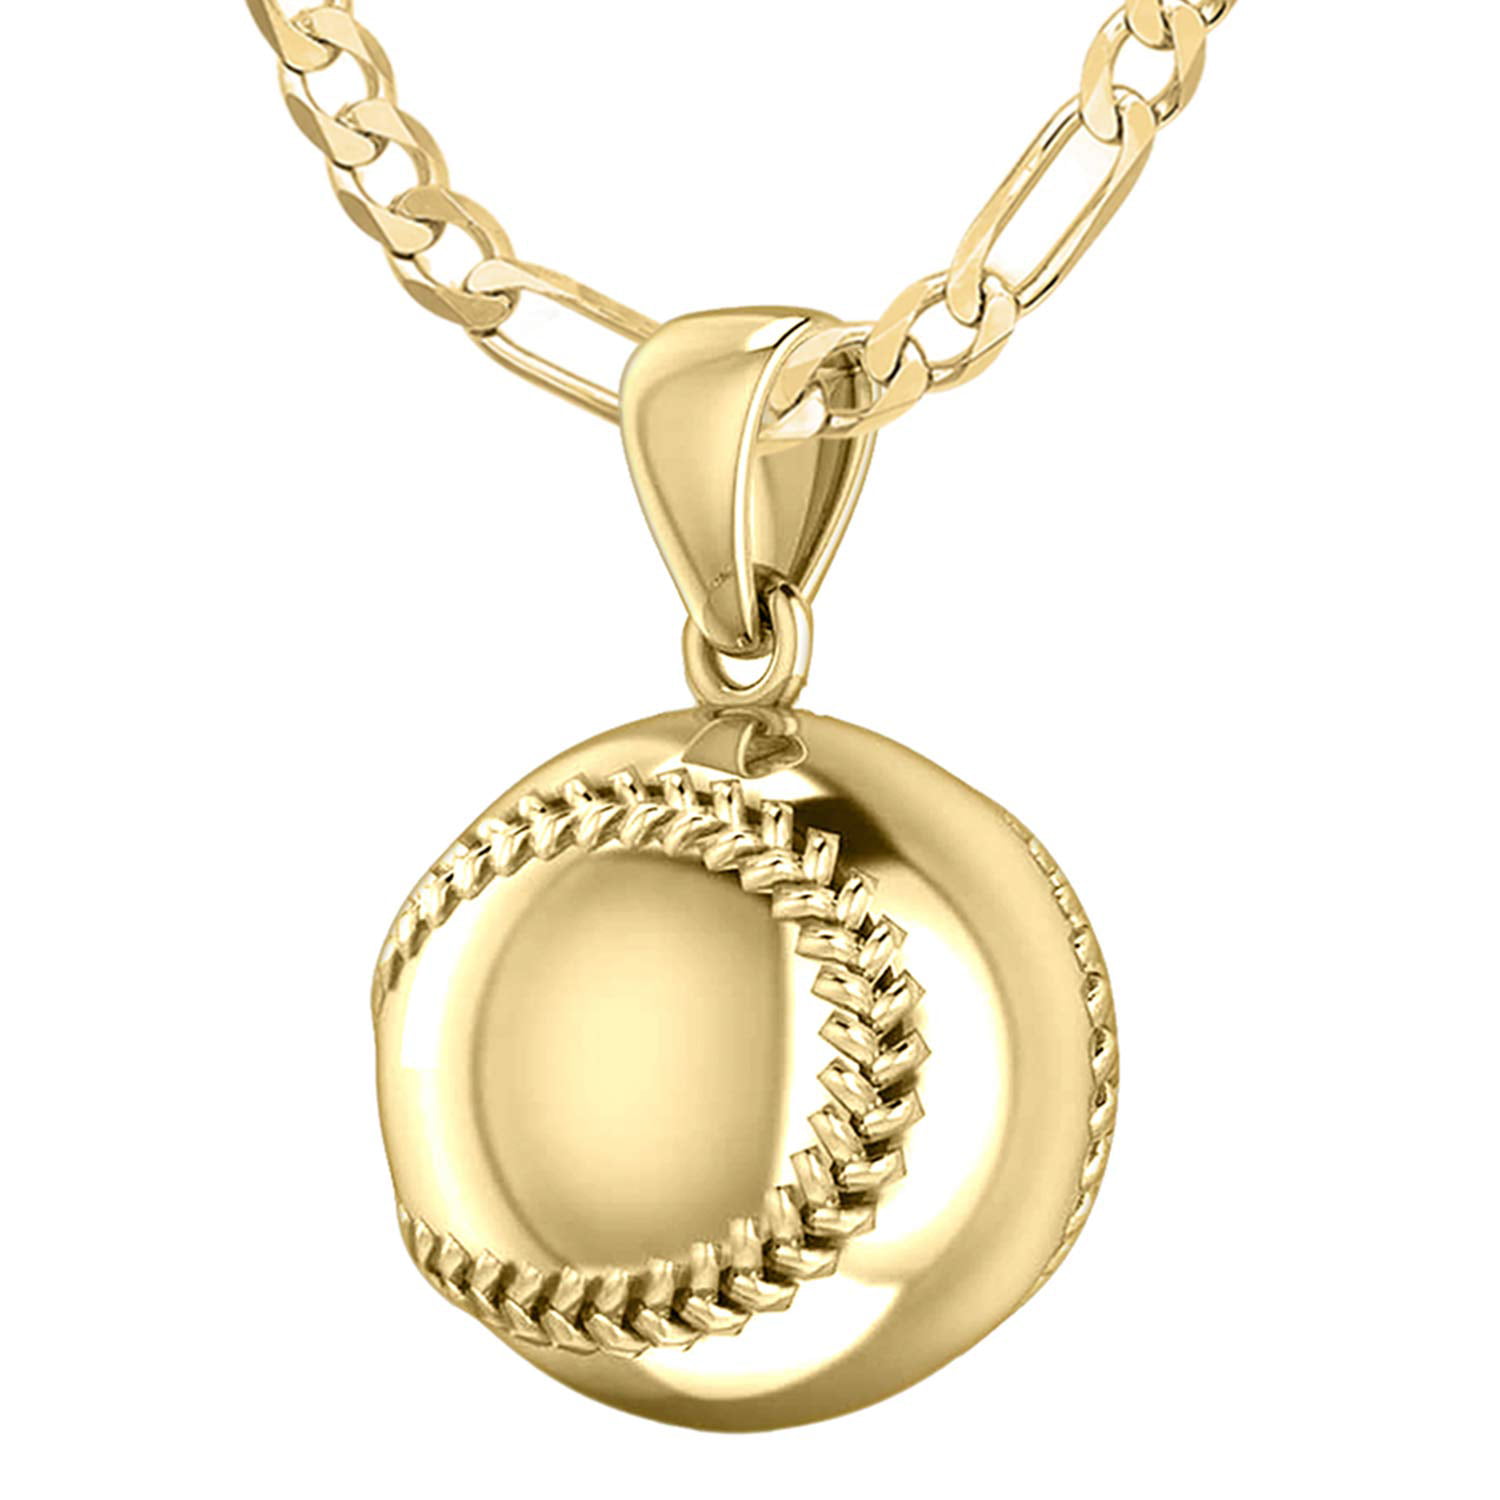 US Jewels Ladies 925 Sterling Silver Small 3D Baseball Ball Sports Charm Pendant Necklace 18in to 24in